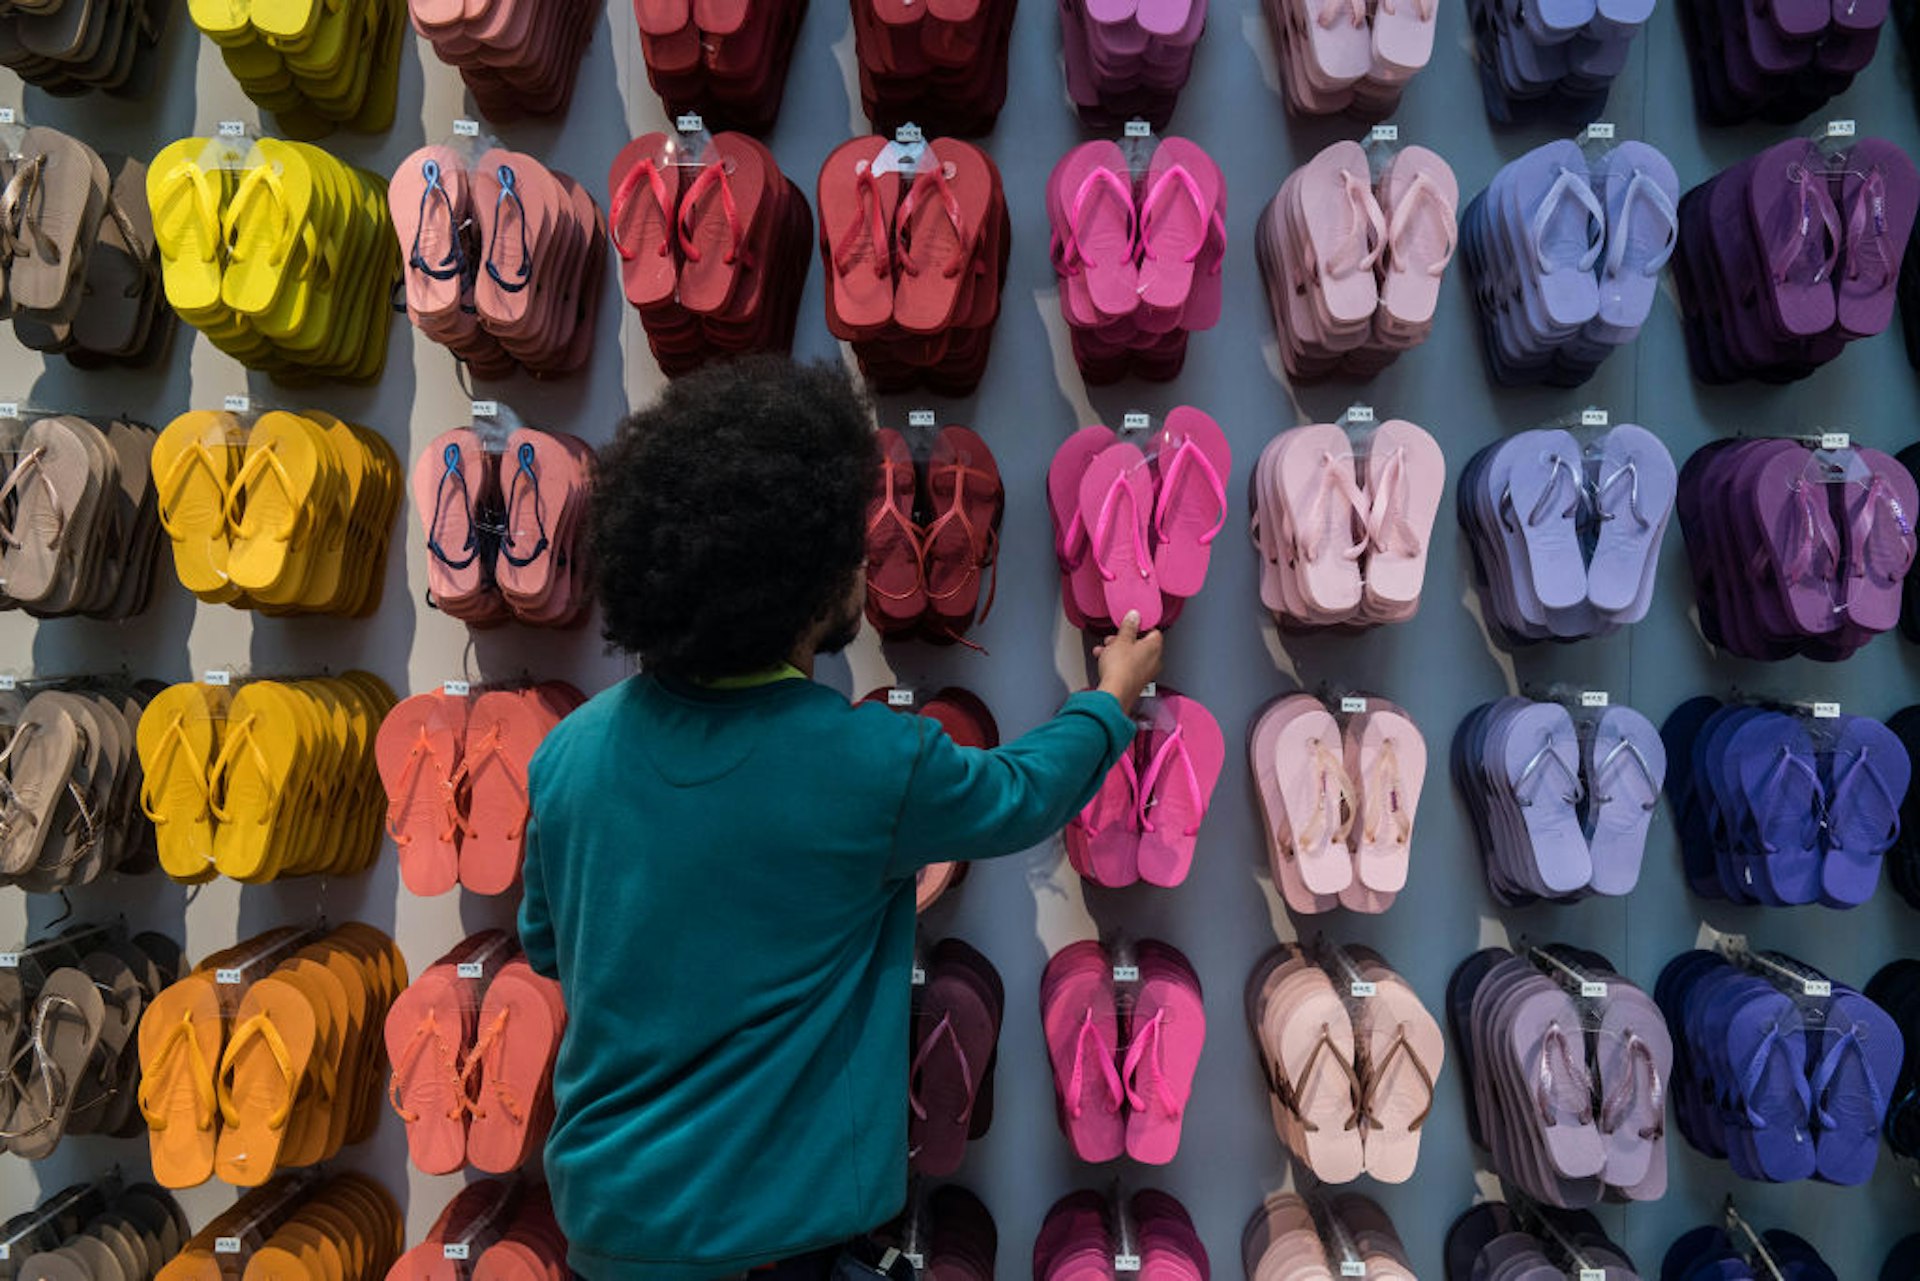 An employee touches a pair of Brazilian Havaianas flip-flops at a store in Sao Paulo